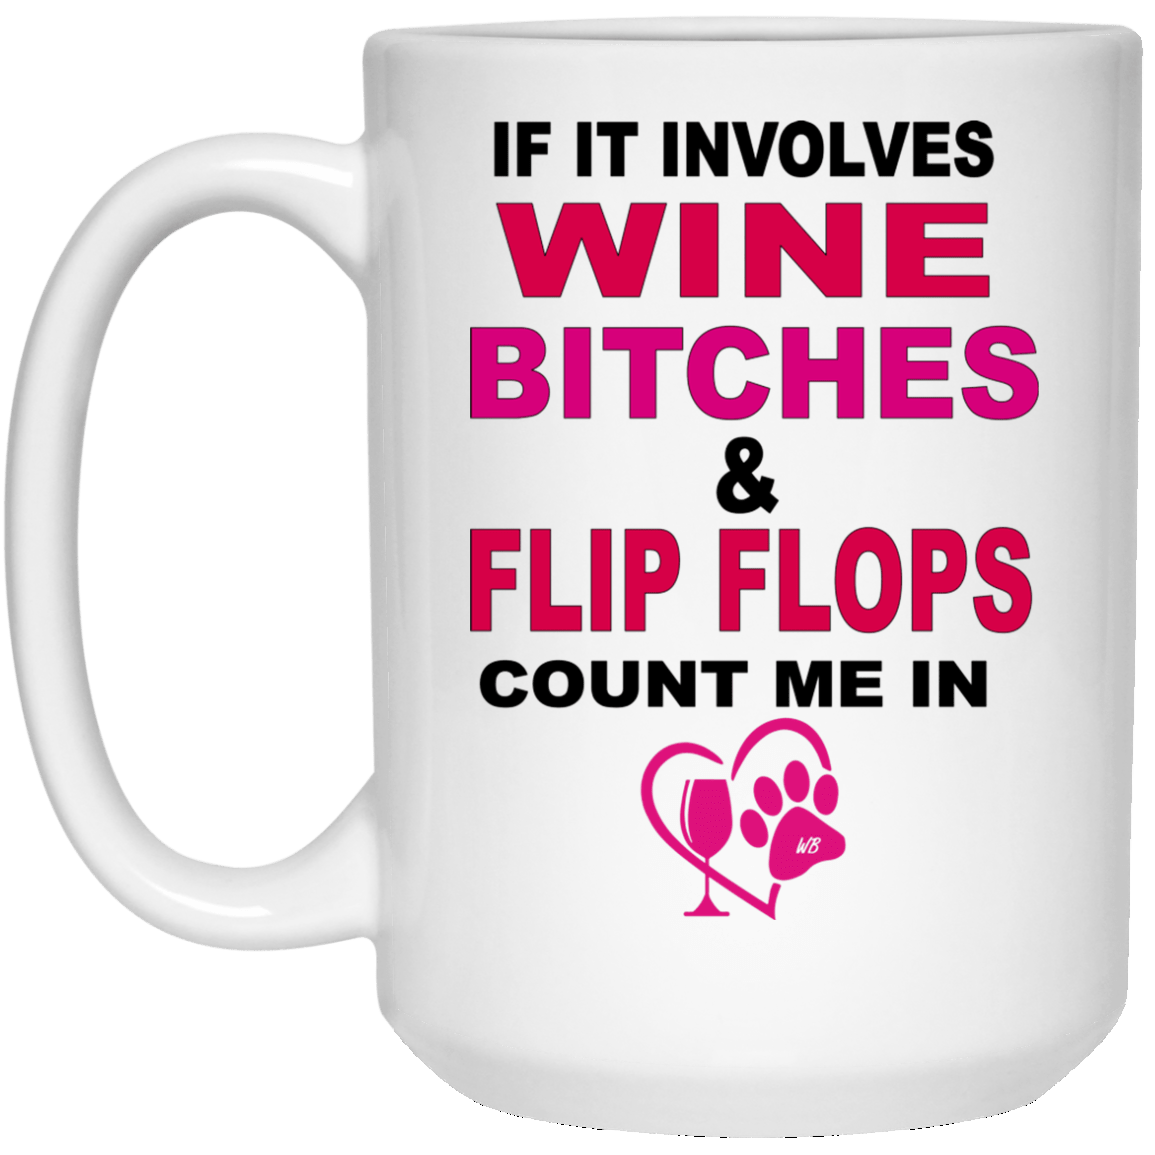 WineyBitches.co " If It Involves Wine Bitches & Flip Flops I'm In" 15 oz. White Mug - WineyBitches.Co - Winey Bitches